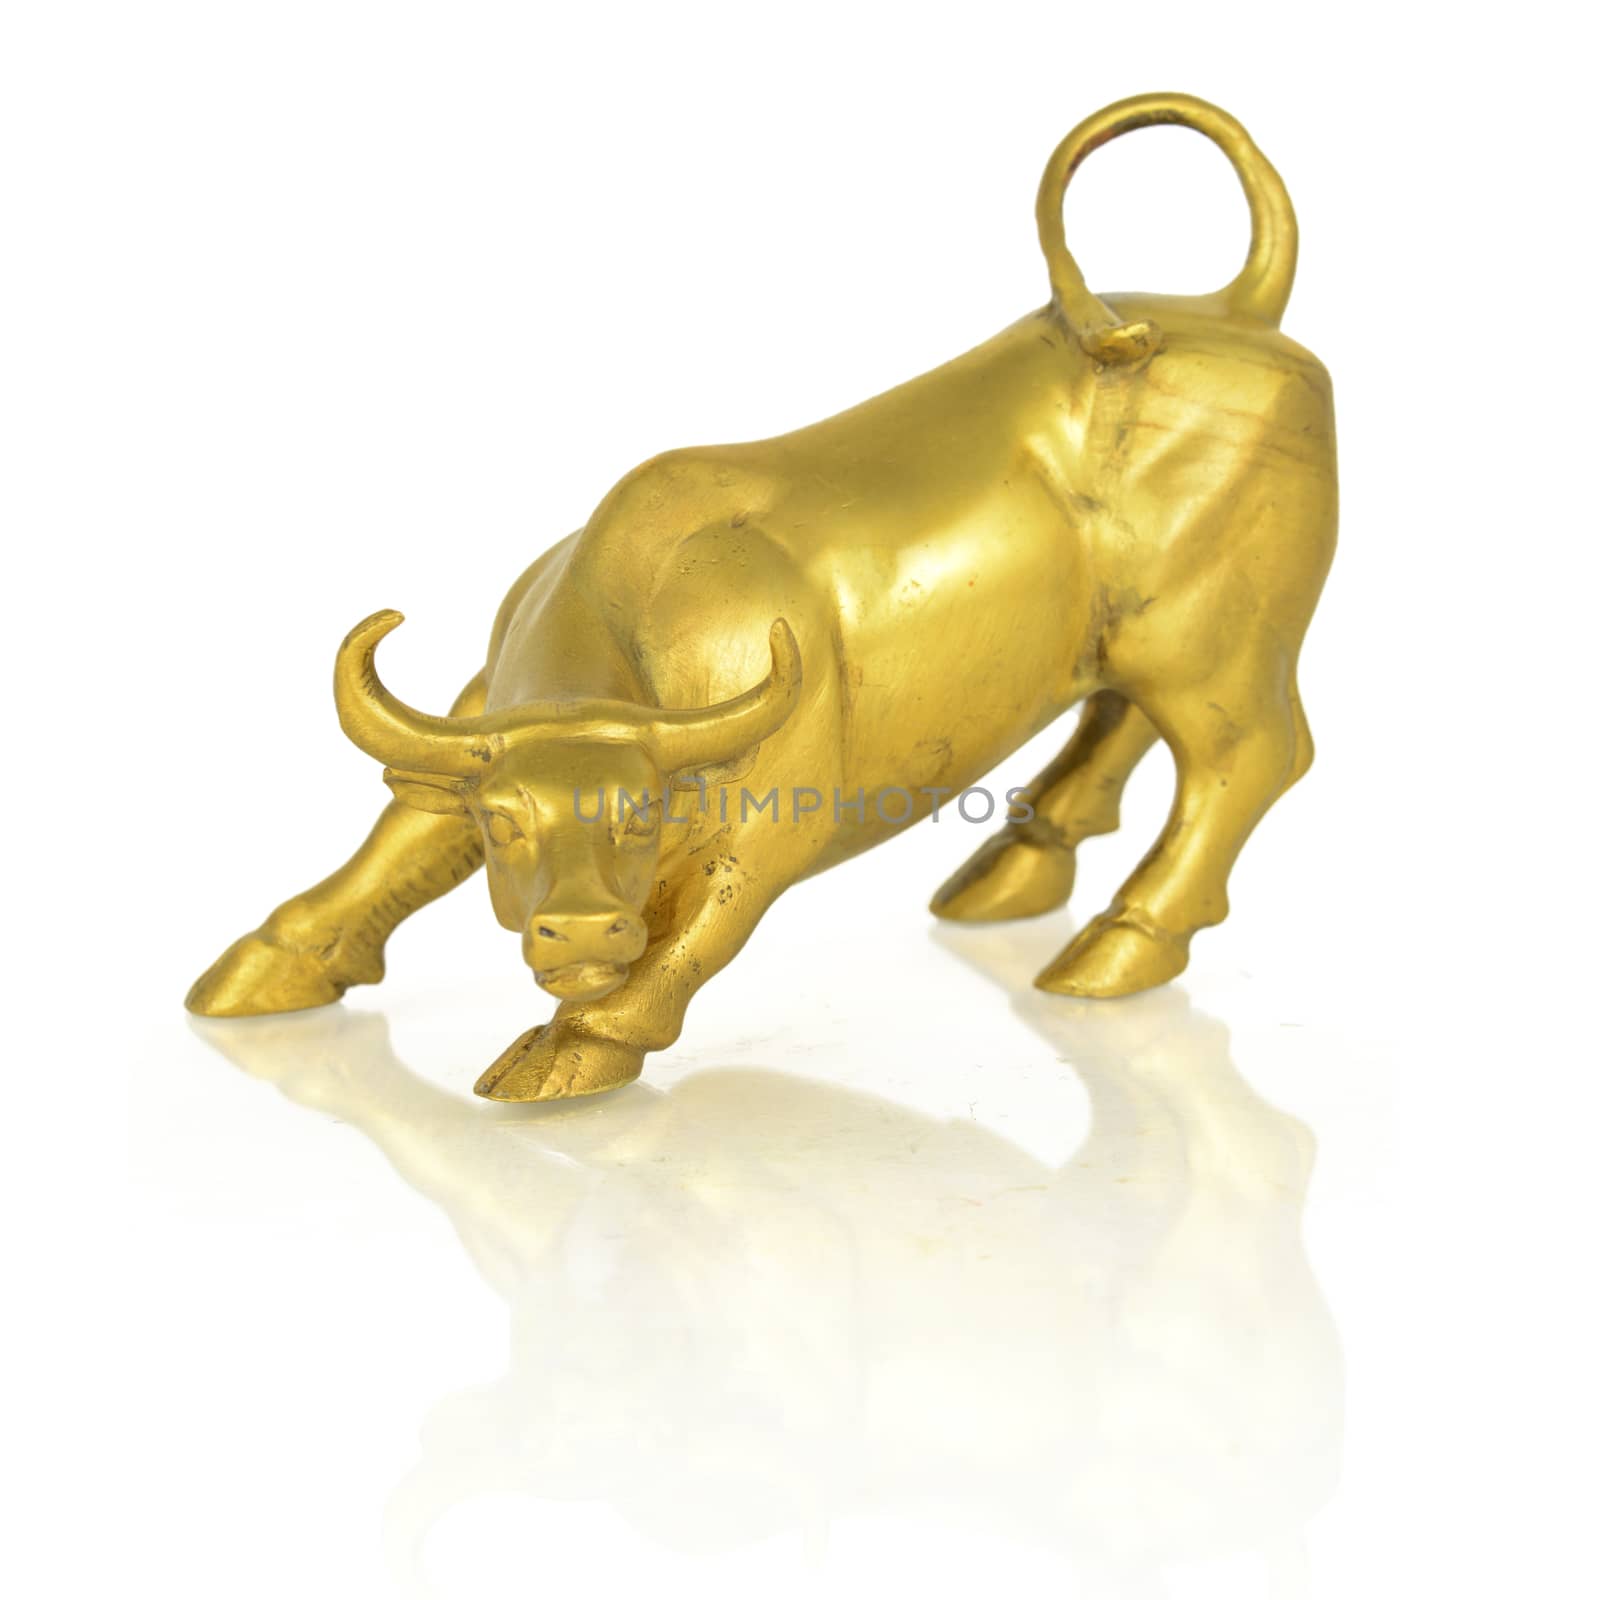 Golden Bull Statue by AlphaBaby